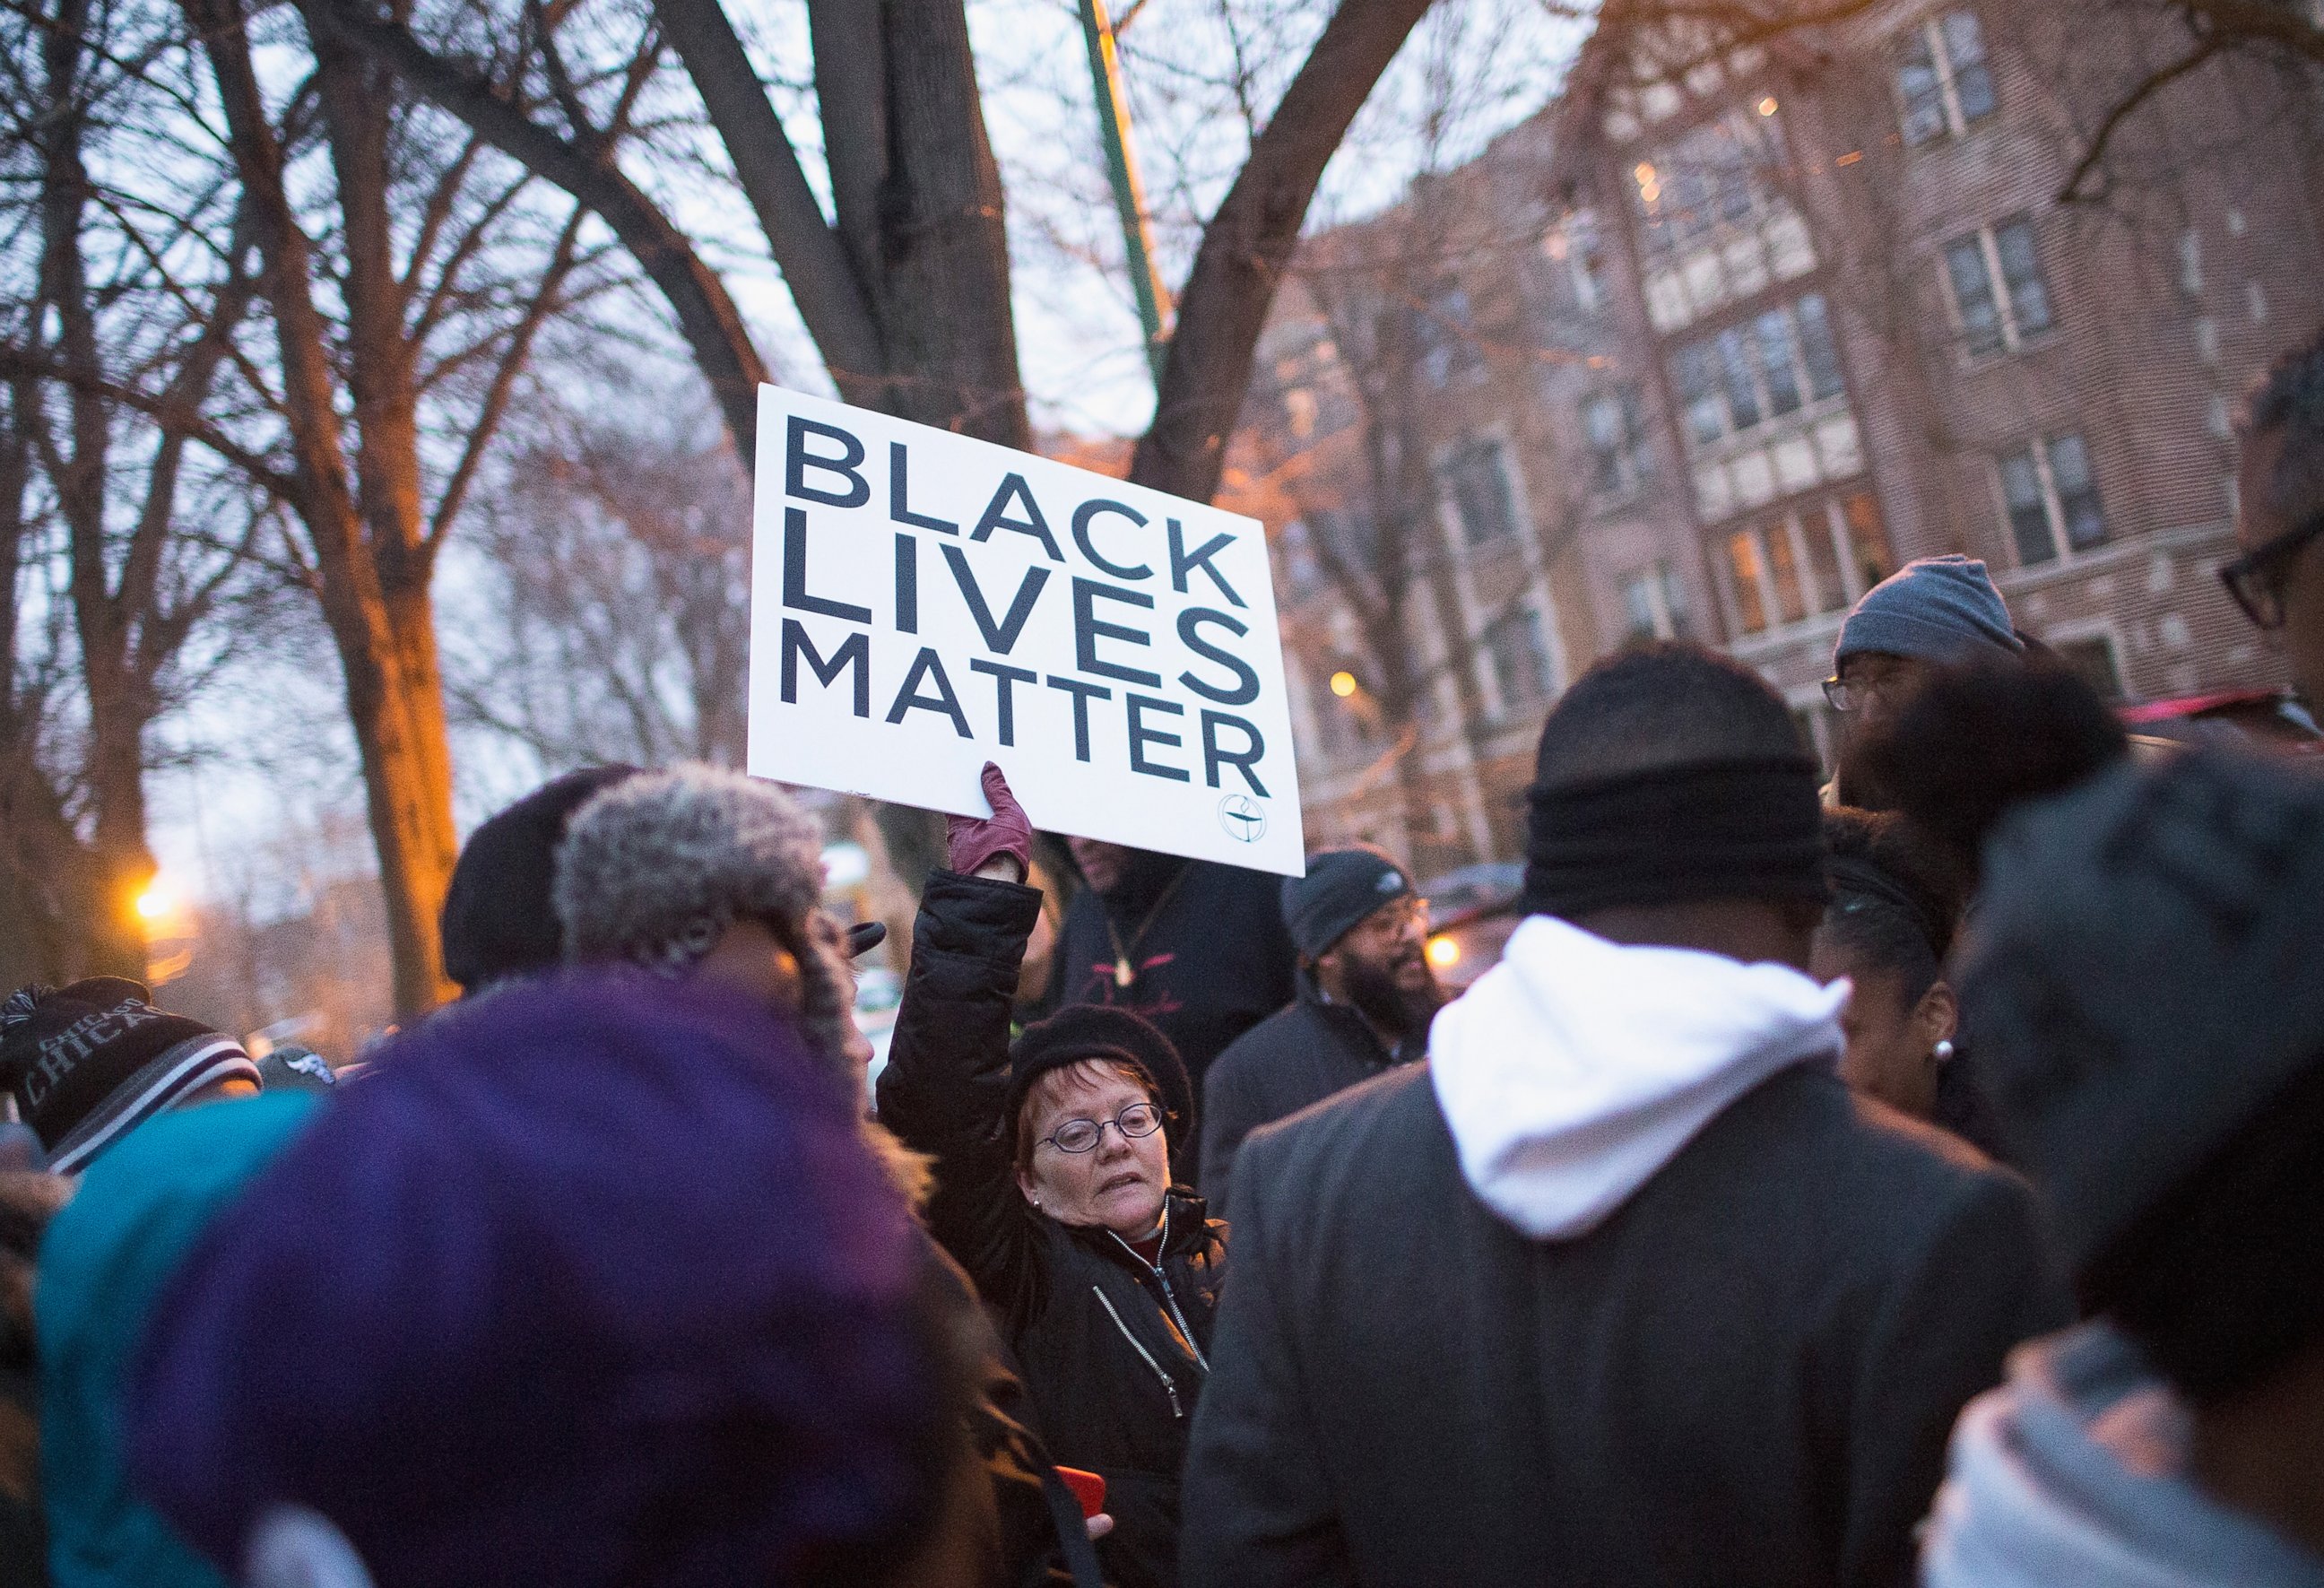 PHOTO: Demonstrators protest outside of Mayor Rahm Emanuel's home on Dec. 29, 2015 in Chicago.